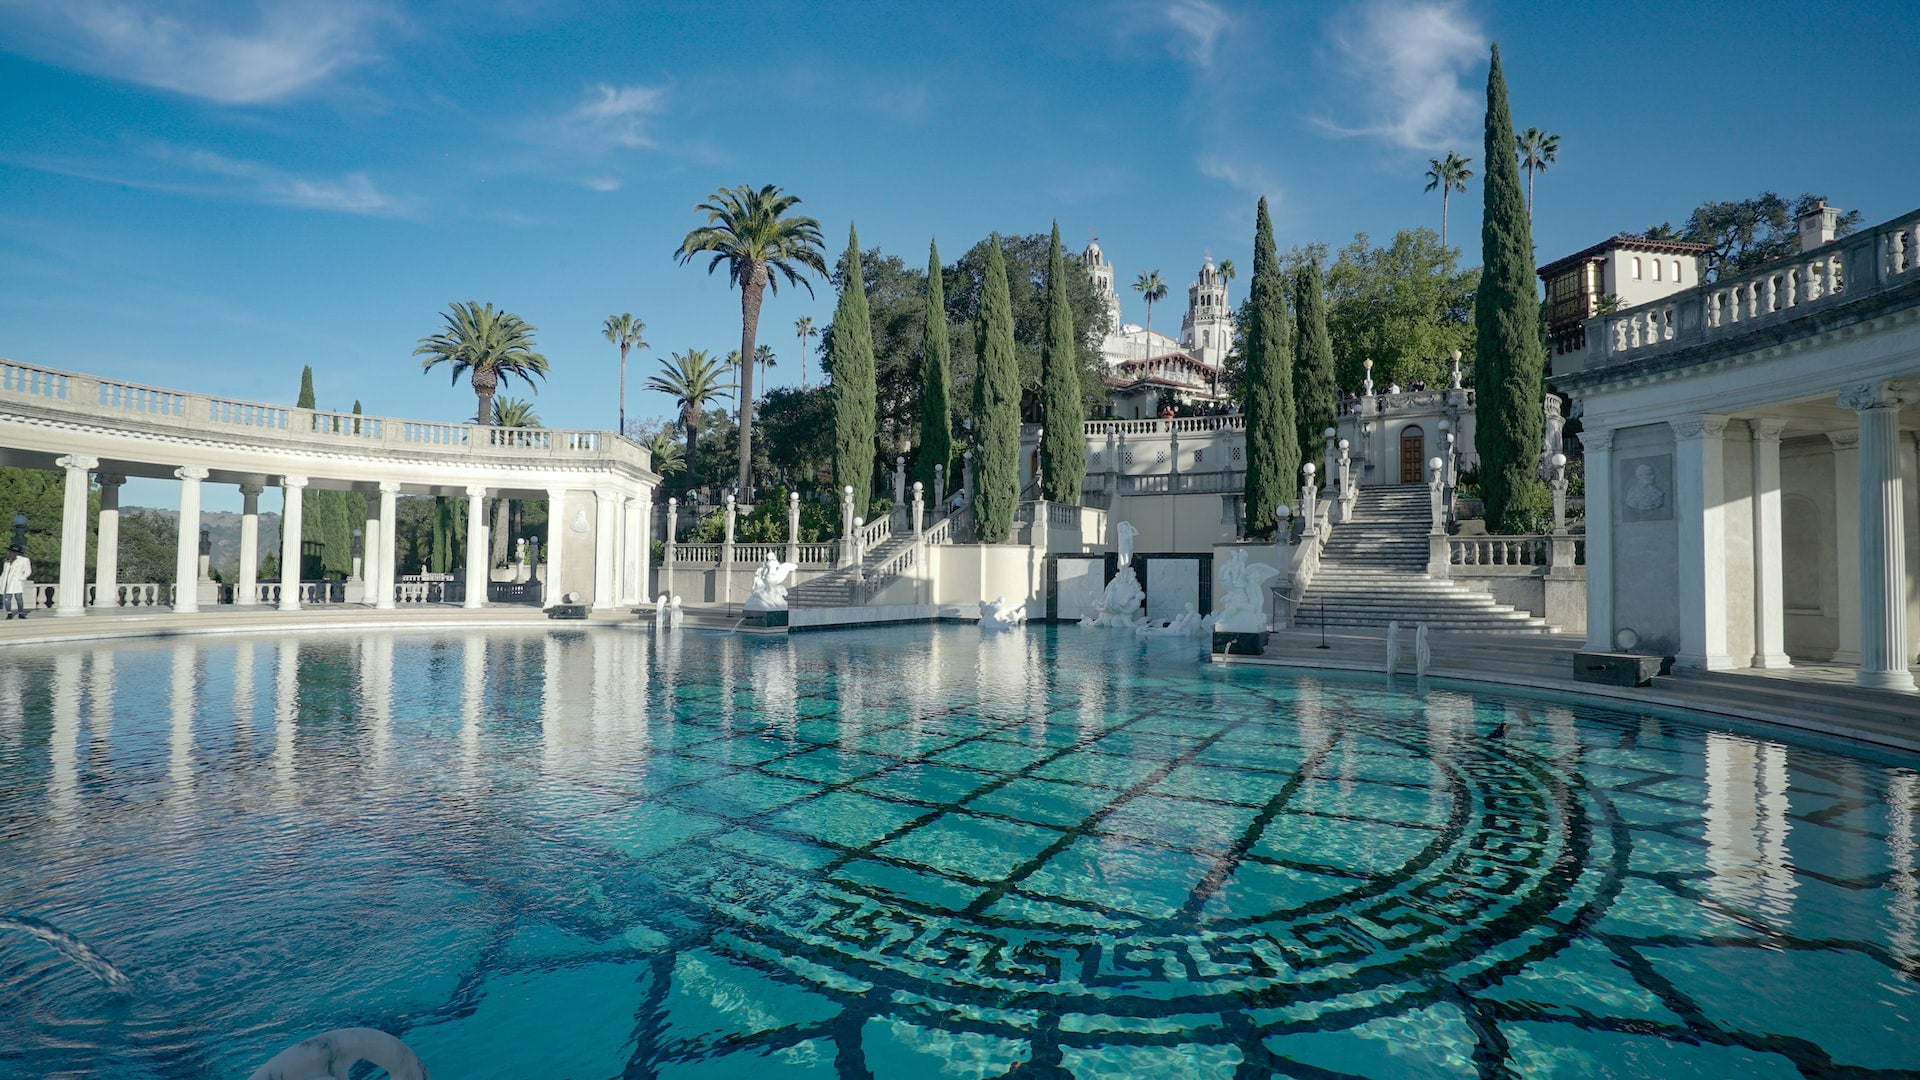 Discover a World of Wonder on Hearst Castle Road - A Magical Journey Awaits